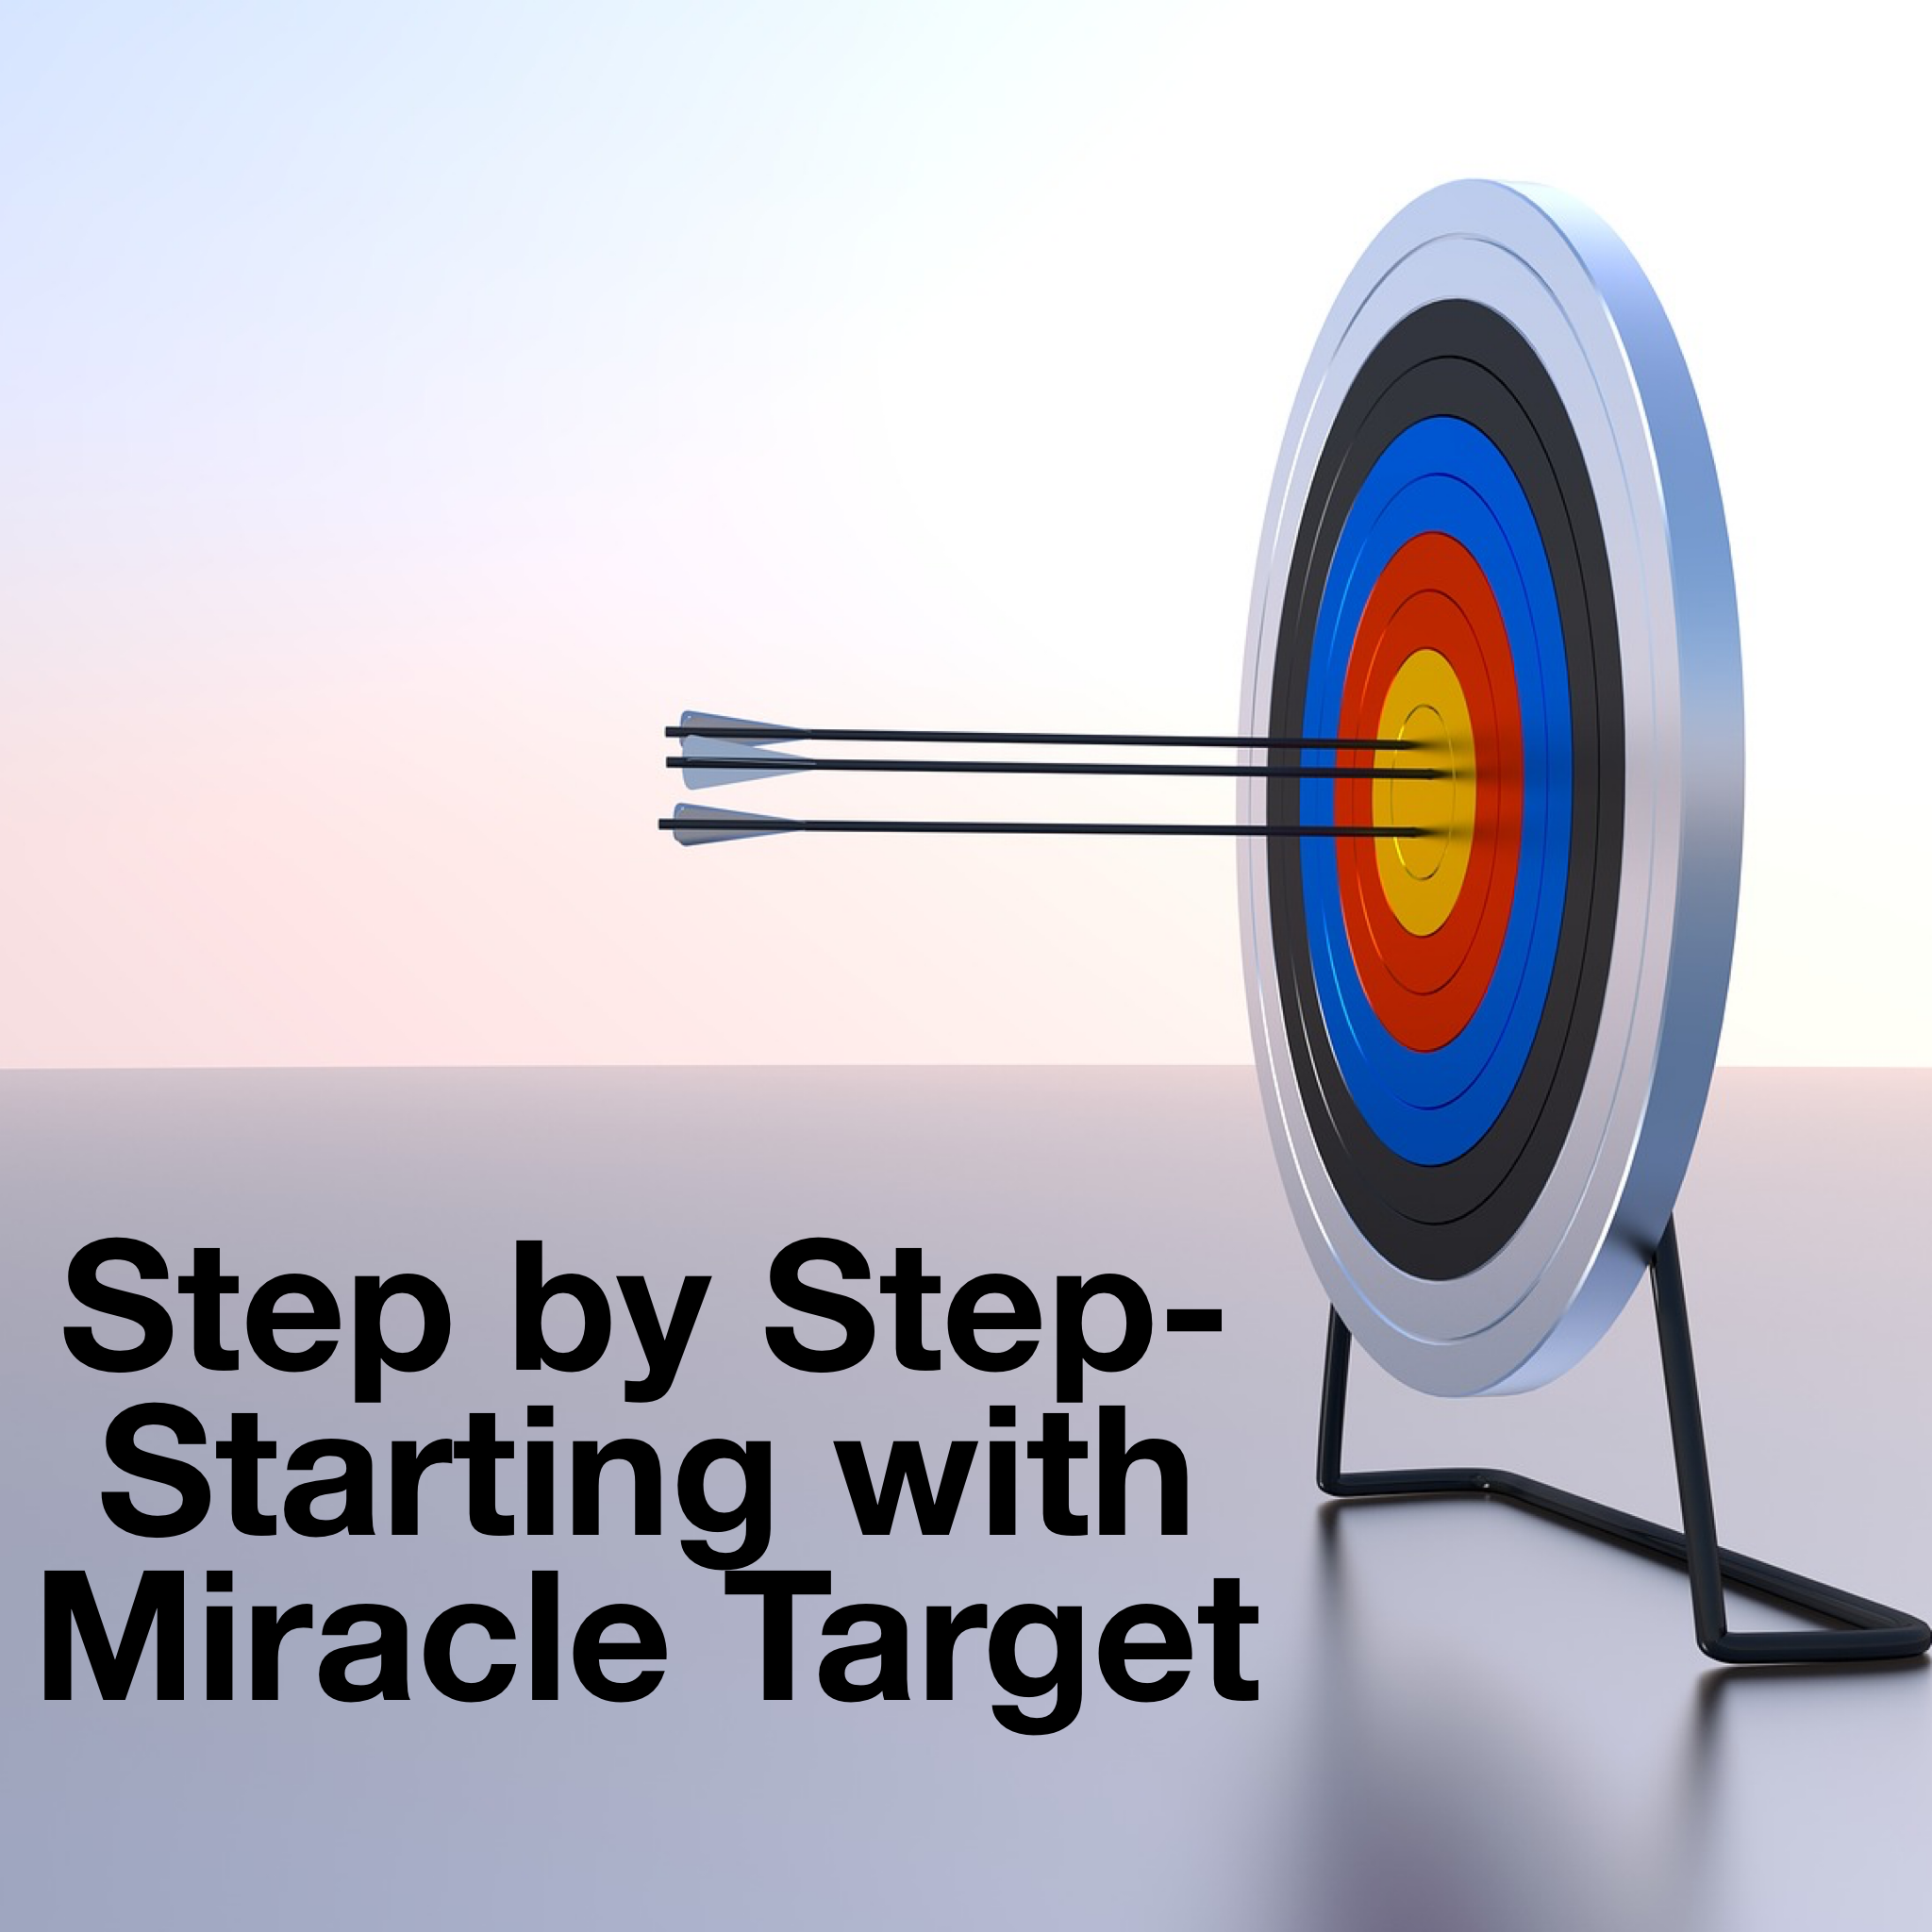 Step by Step - Starting with Miracle Target - 9/24/19